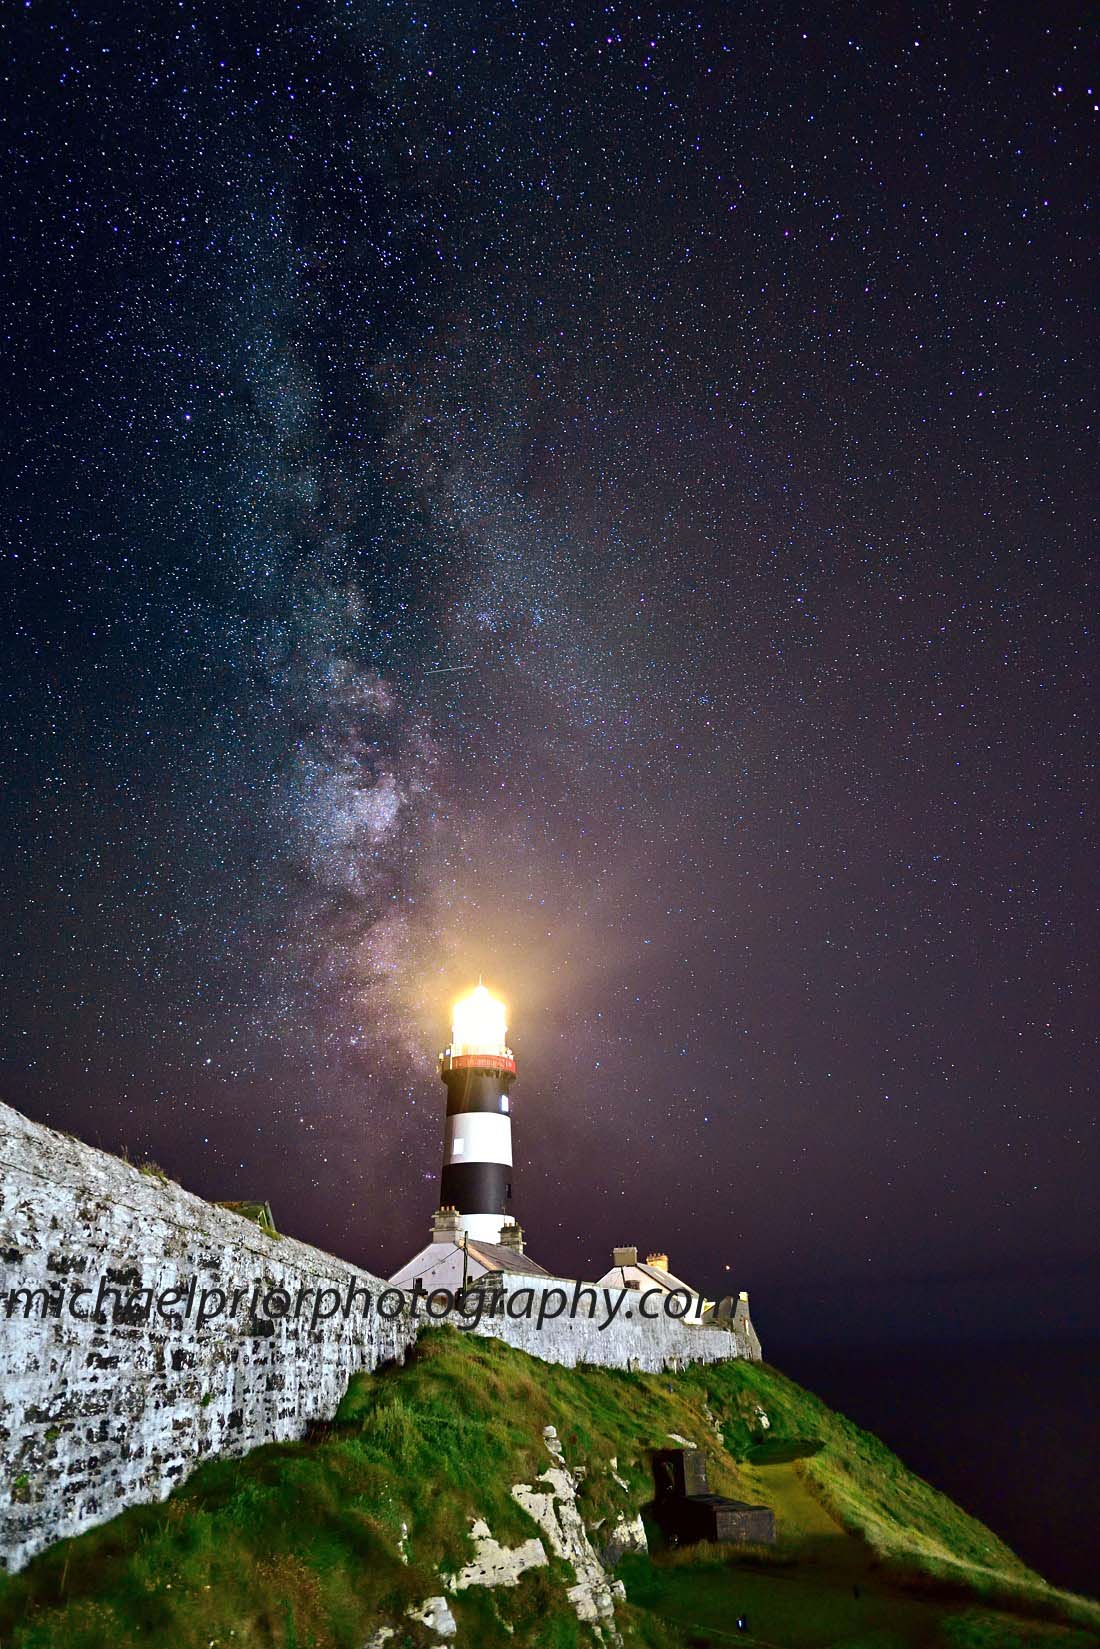 The Oldhead Of Kinsale Under The Milkyway With The White Washed Walls - Michael Prior Photography 